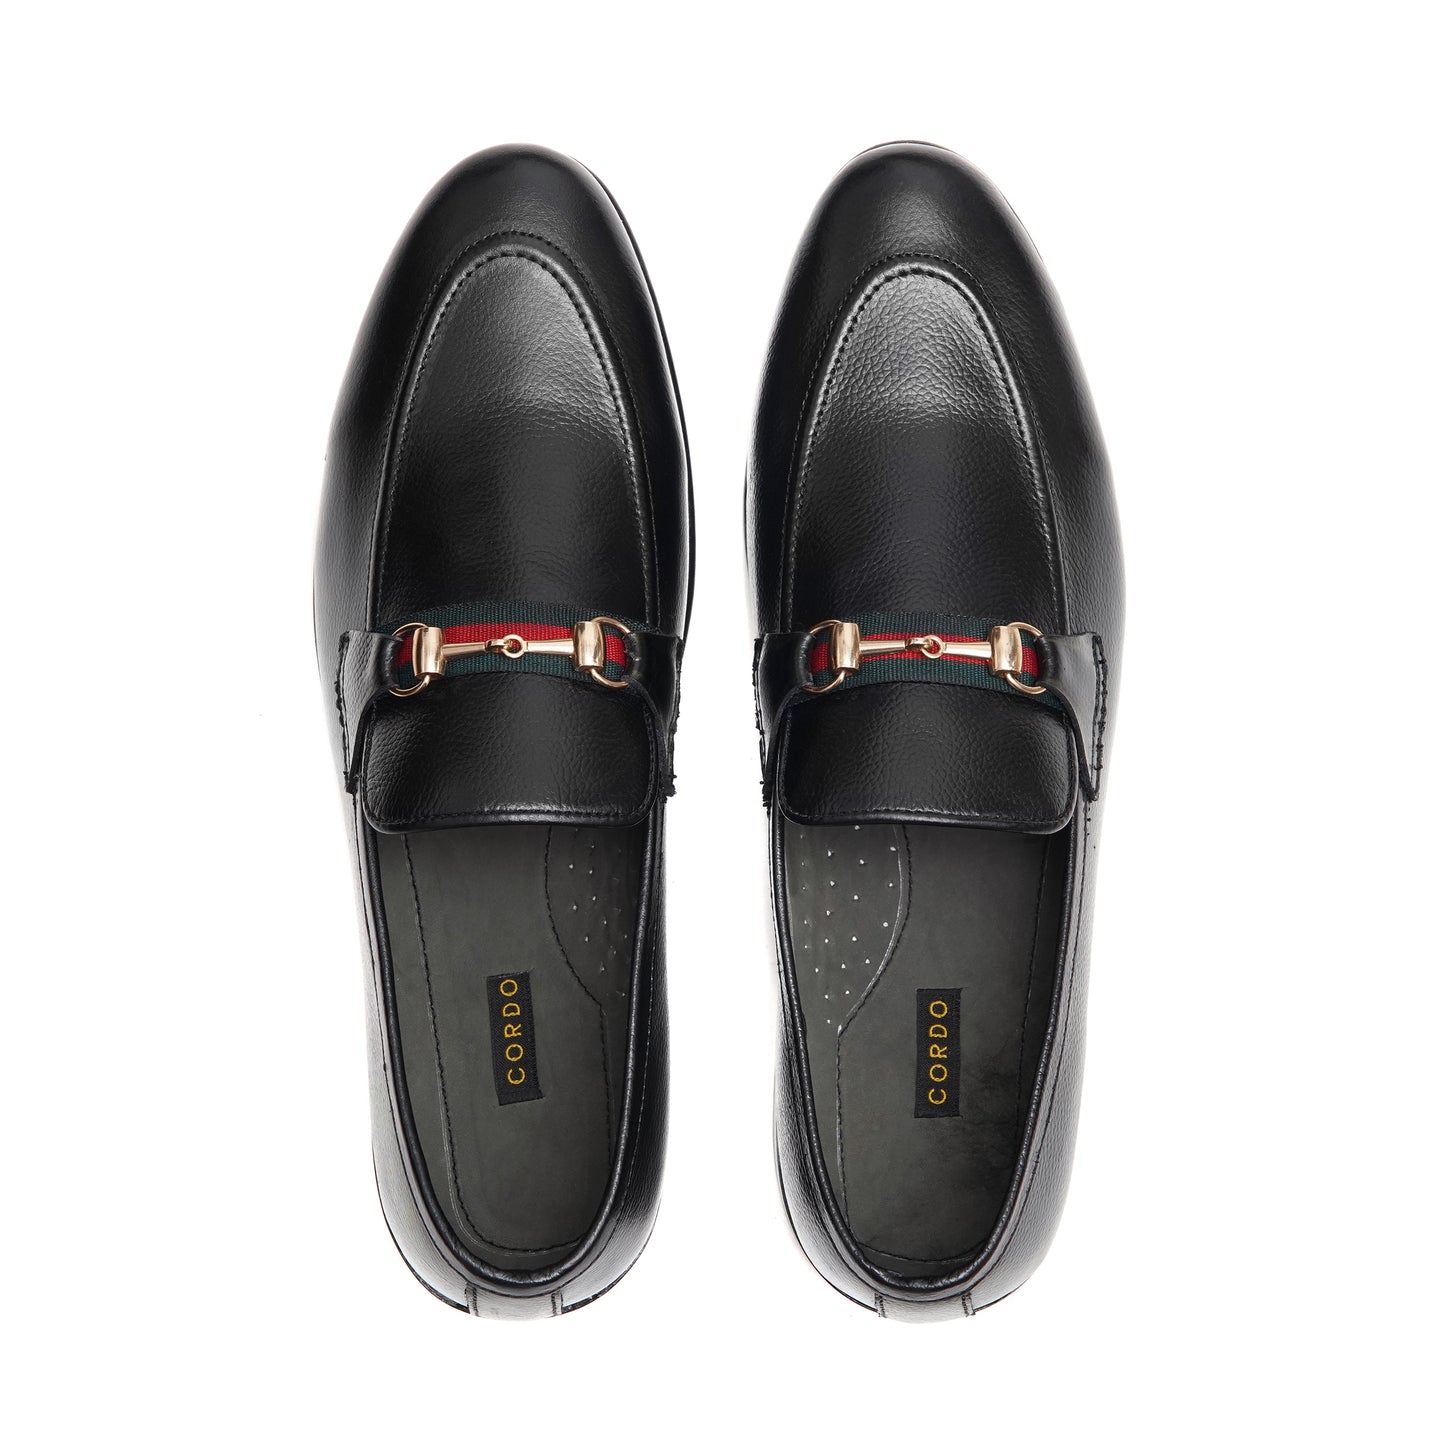 CS006- Black Gucci Strap Leather Loafers